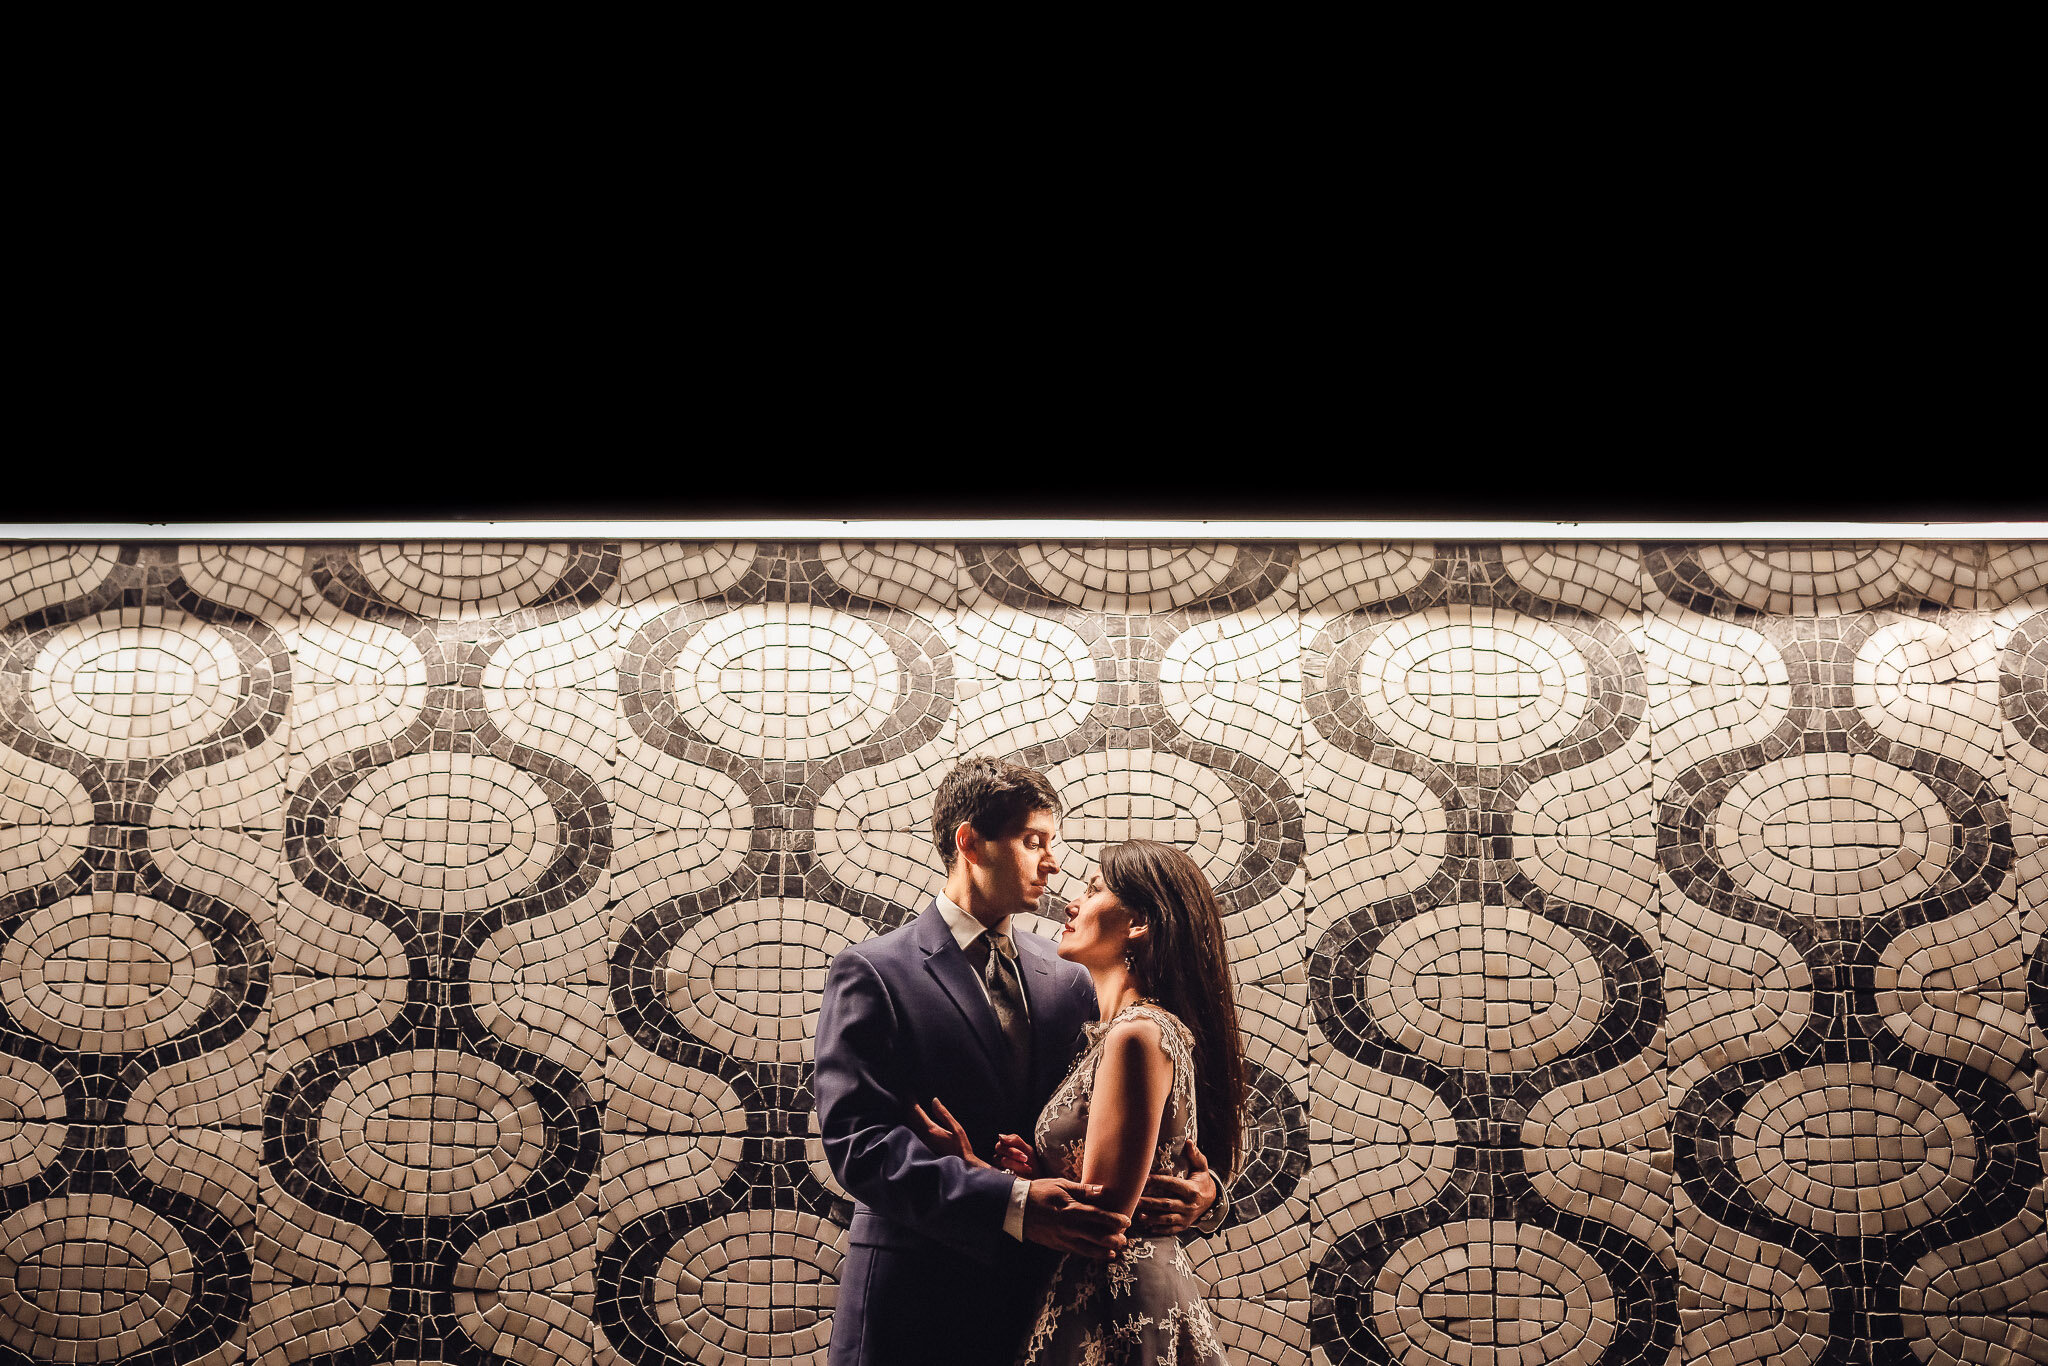 NYC Meat Packing Engagement Session Photographed by Top Indian Wedding Photographer Manish and Sung Photography